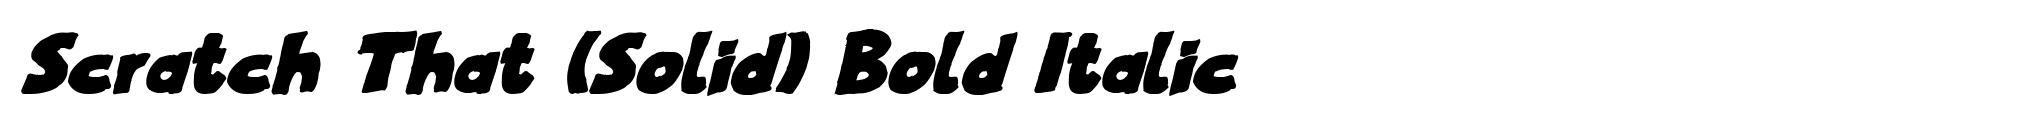 Scratch That (Solid) Bold Italic image